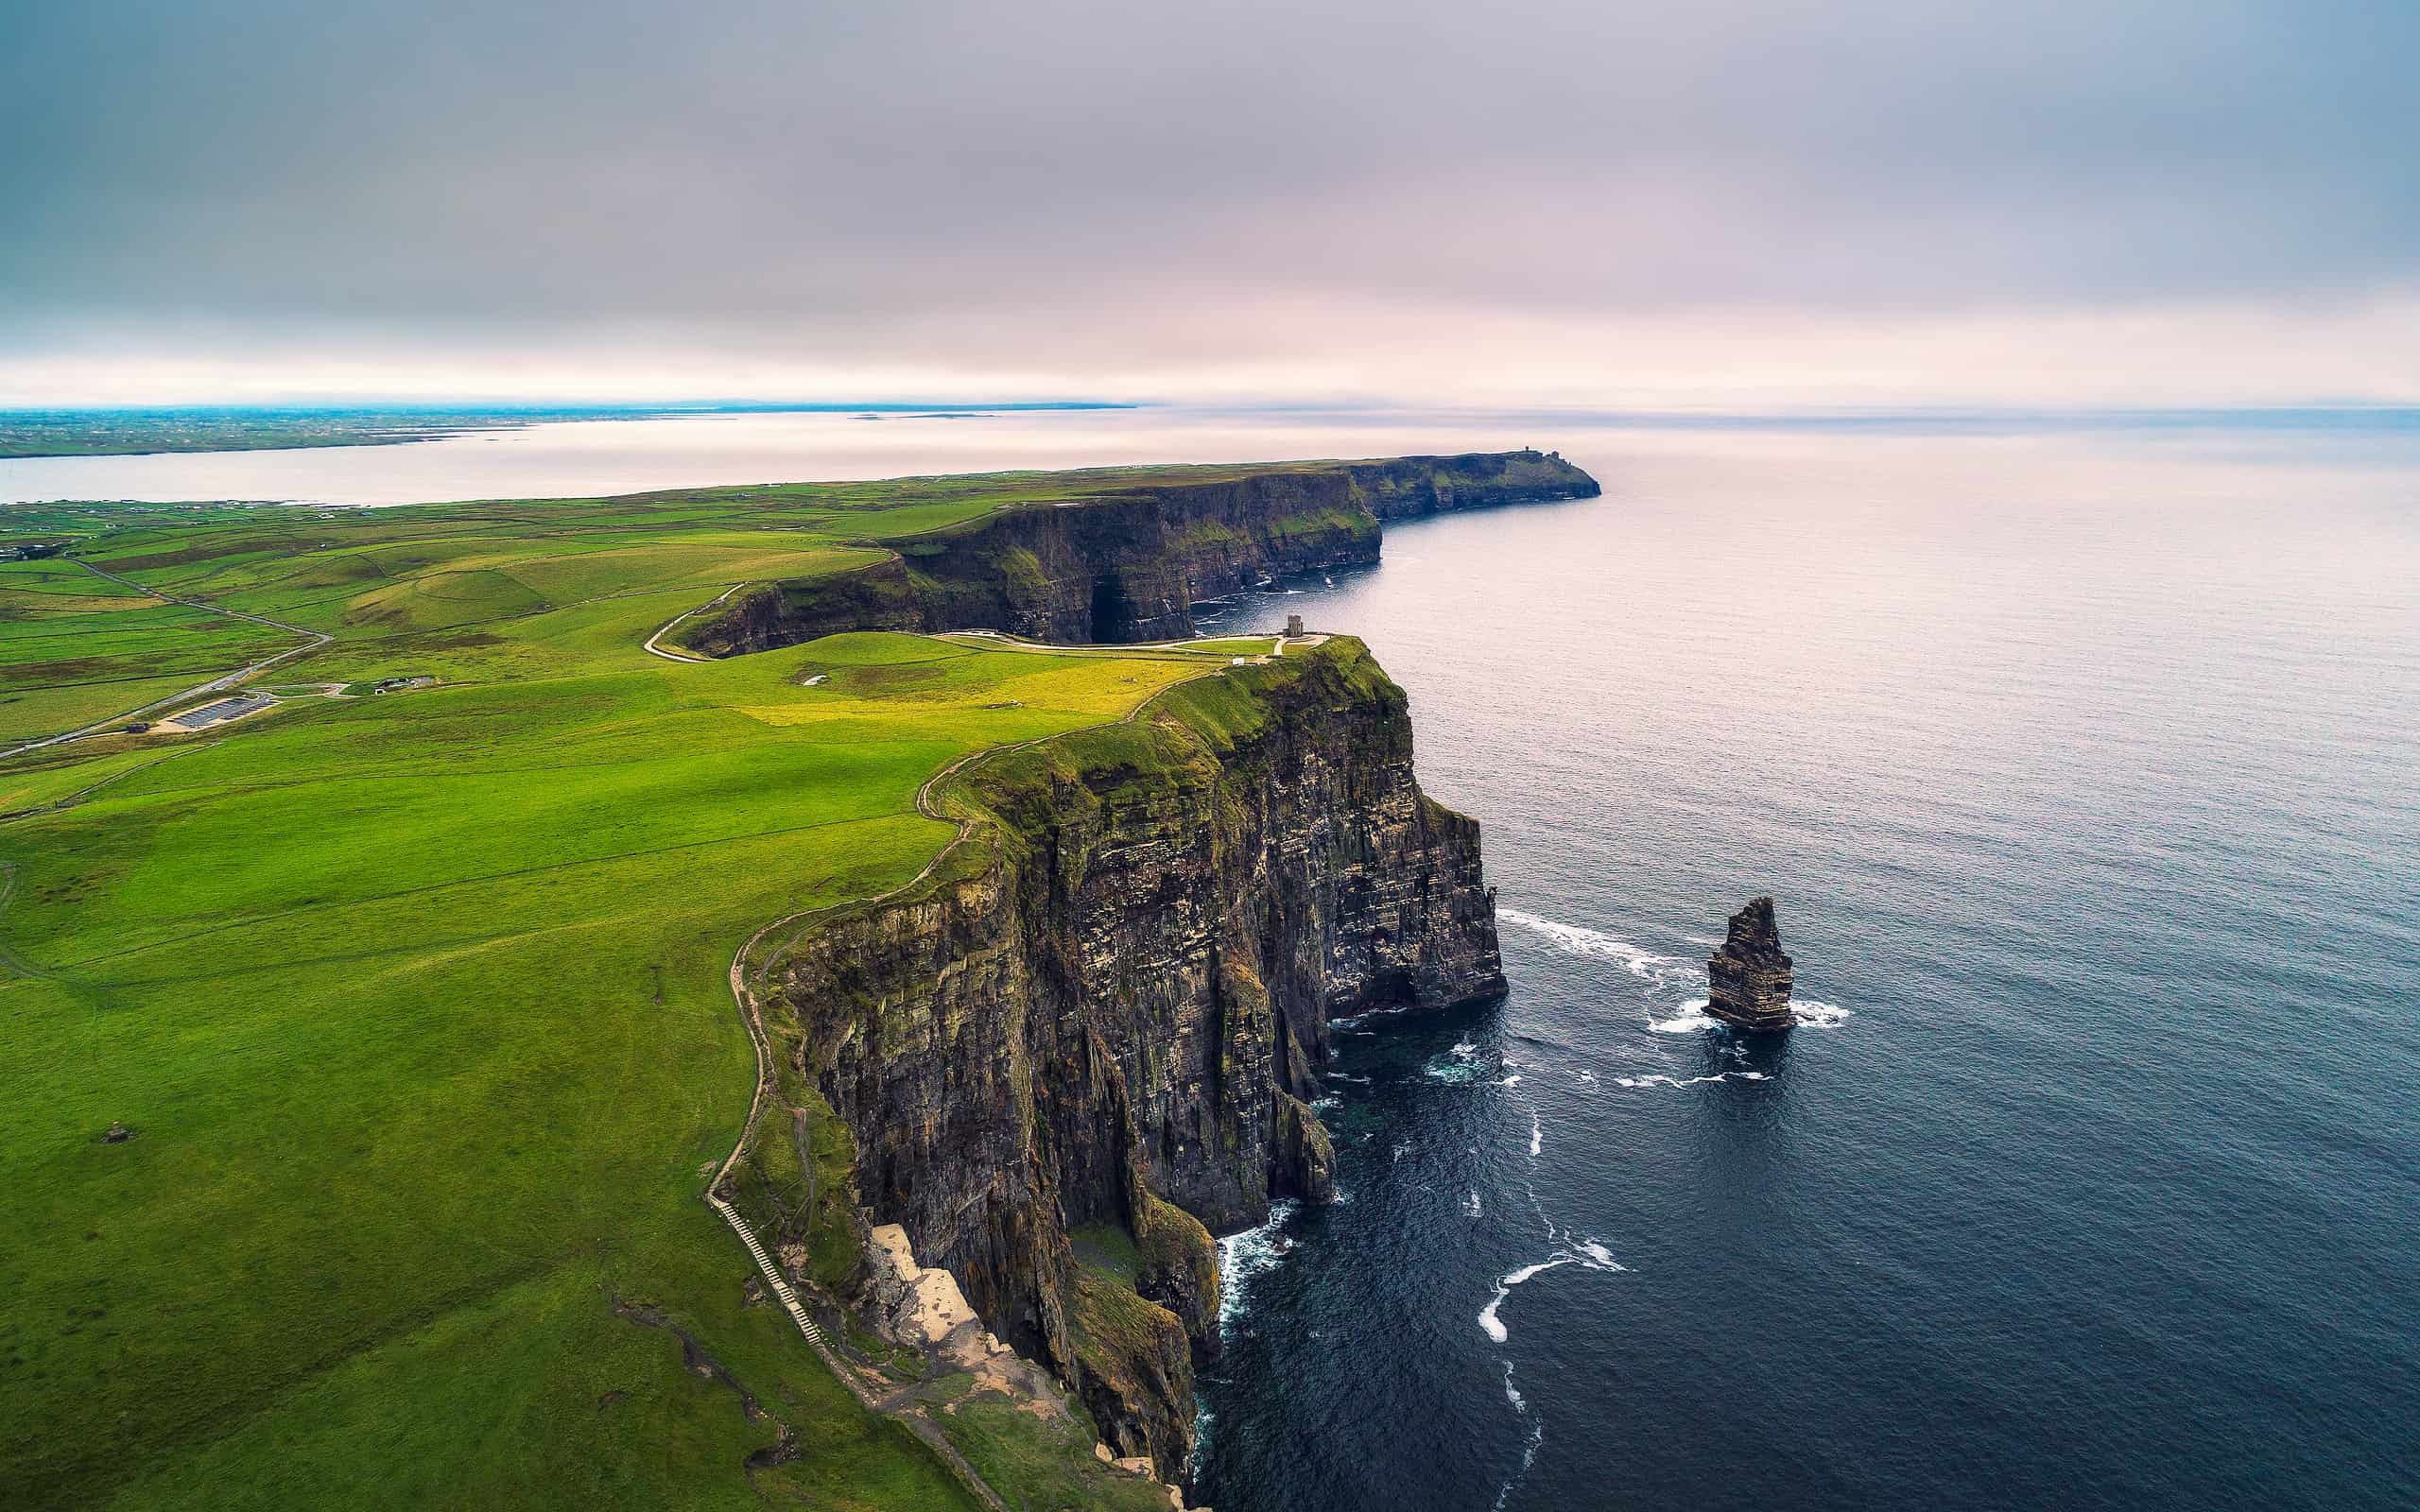 Aerial view of the scenic Cliffs of Moher in Ireland